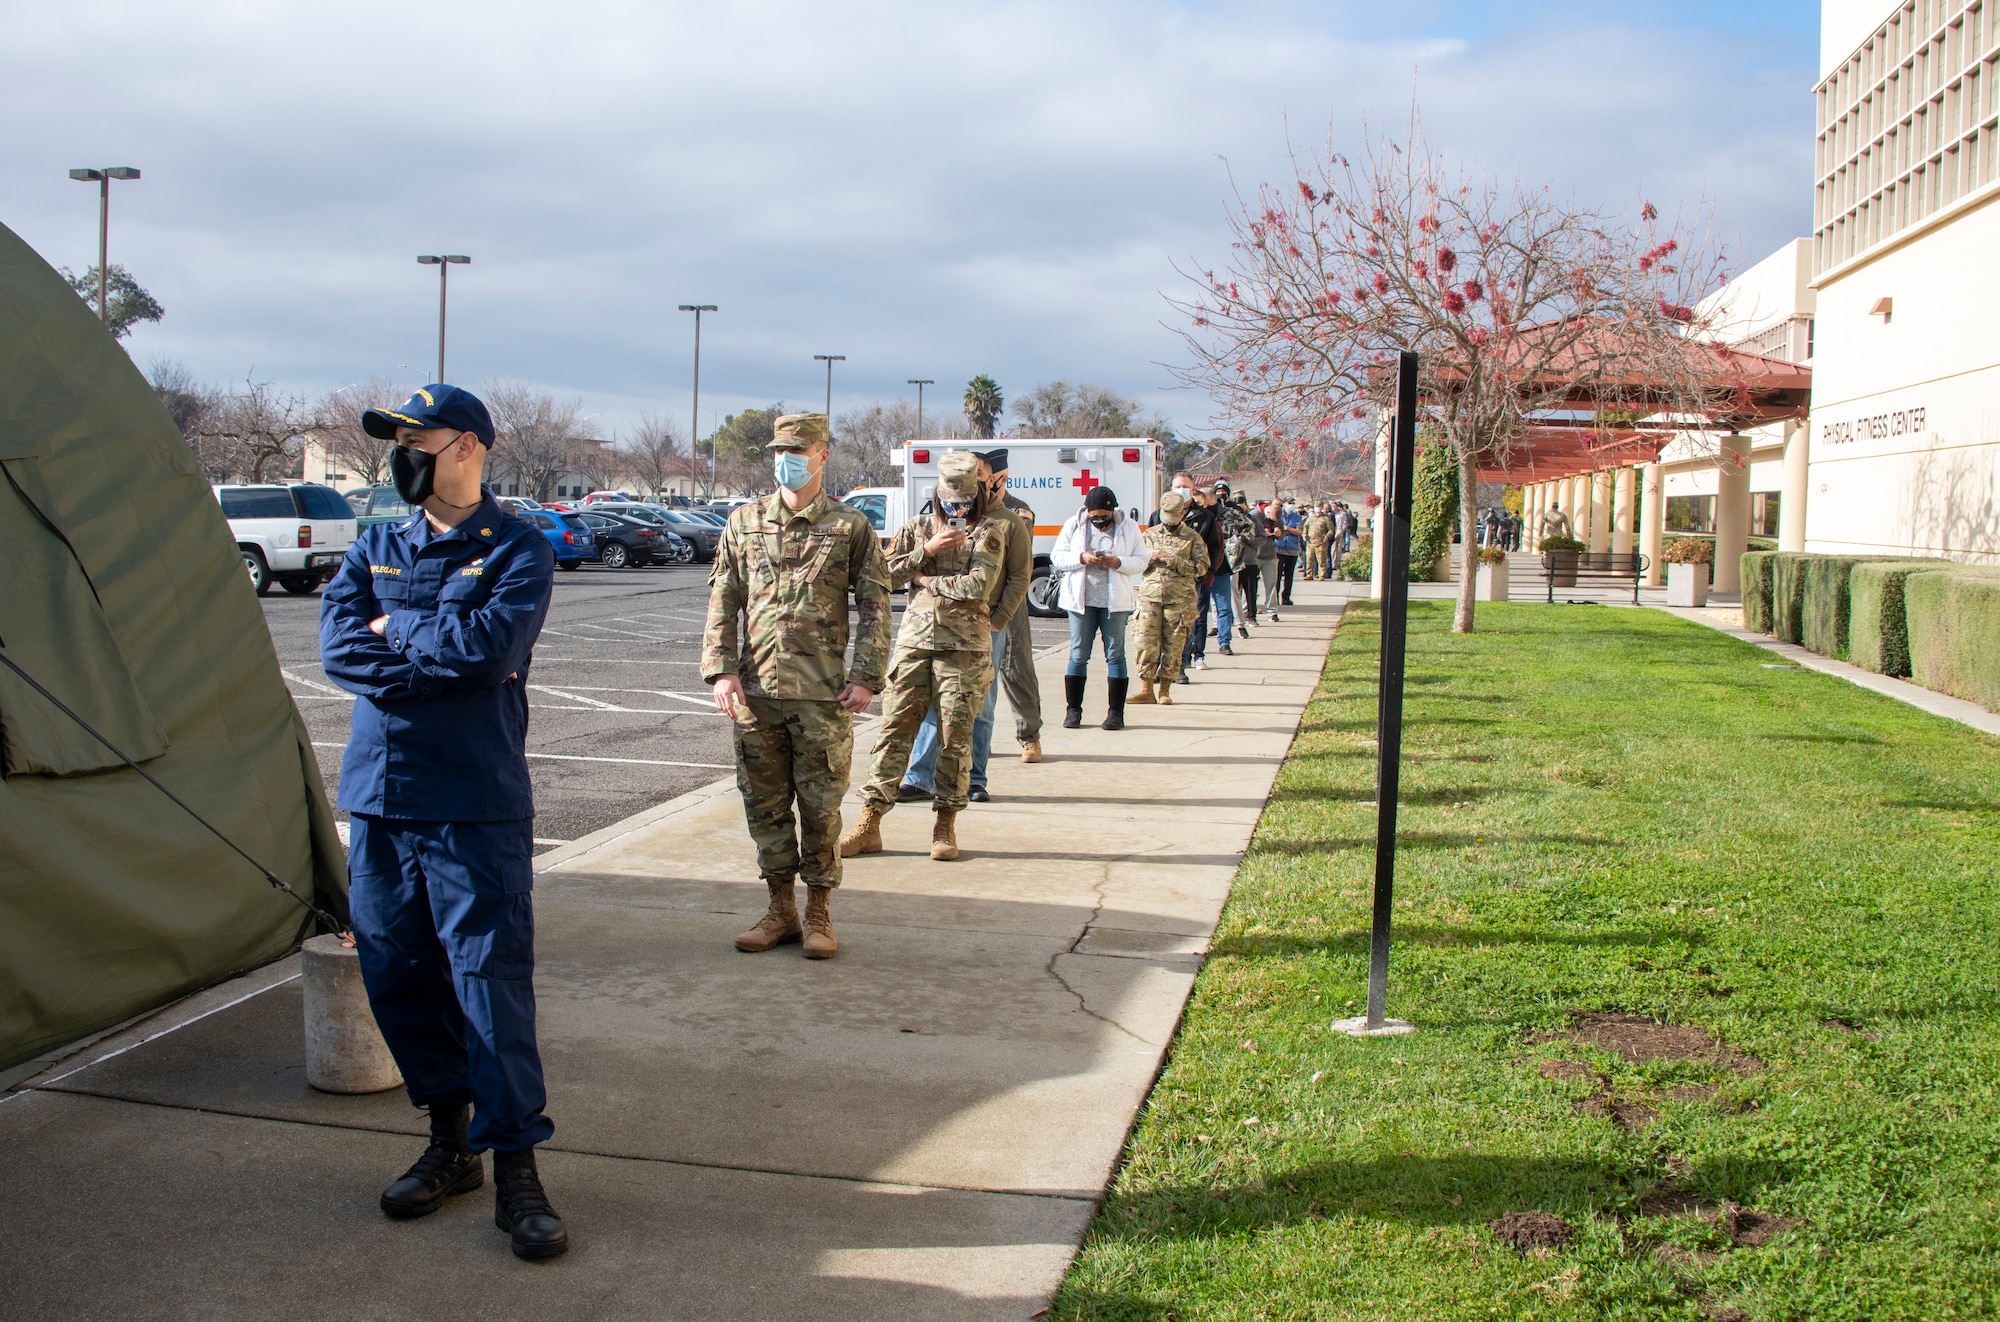 Department of Defense personnel line up to receive the initial dose of the COVID-19 vaccine at the Fitness Center, Travis Air Force Base, California, Jan. 8, 2021. The vaccine requires two doses per person, separated by about four weeks between doses. It is designed to protect personnel against the coronavirus, and officials are encouraging all prioritized personnel to take the vaccine as it becomes available. (U.S. Air Force photo by Heide Couch)